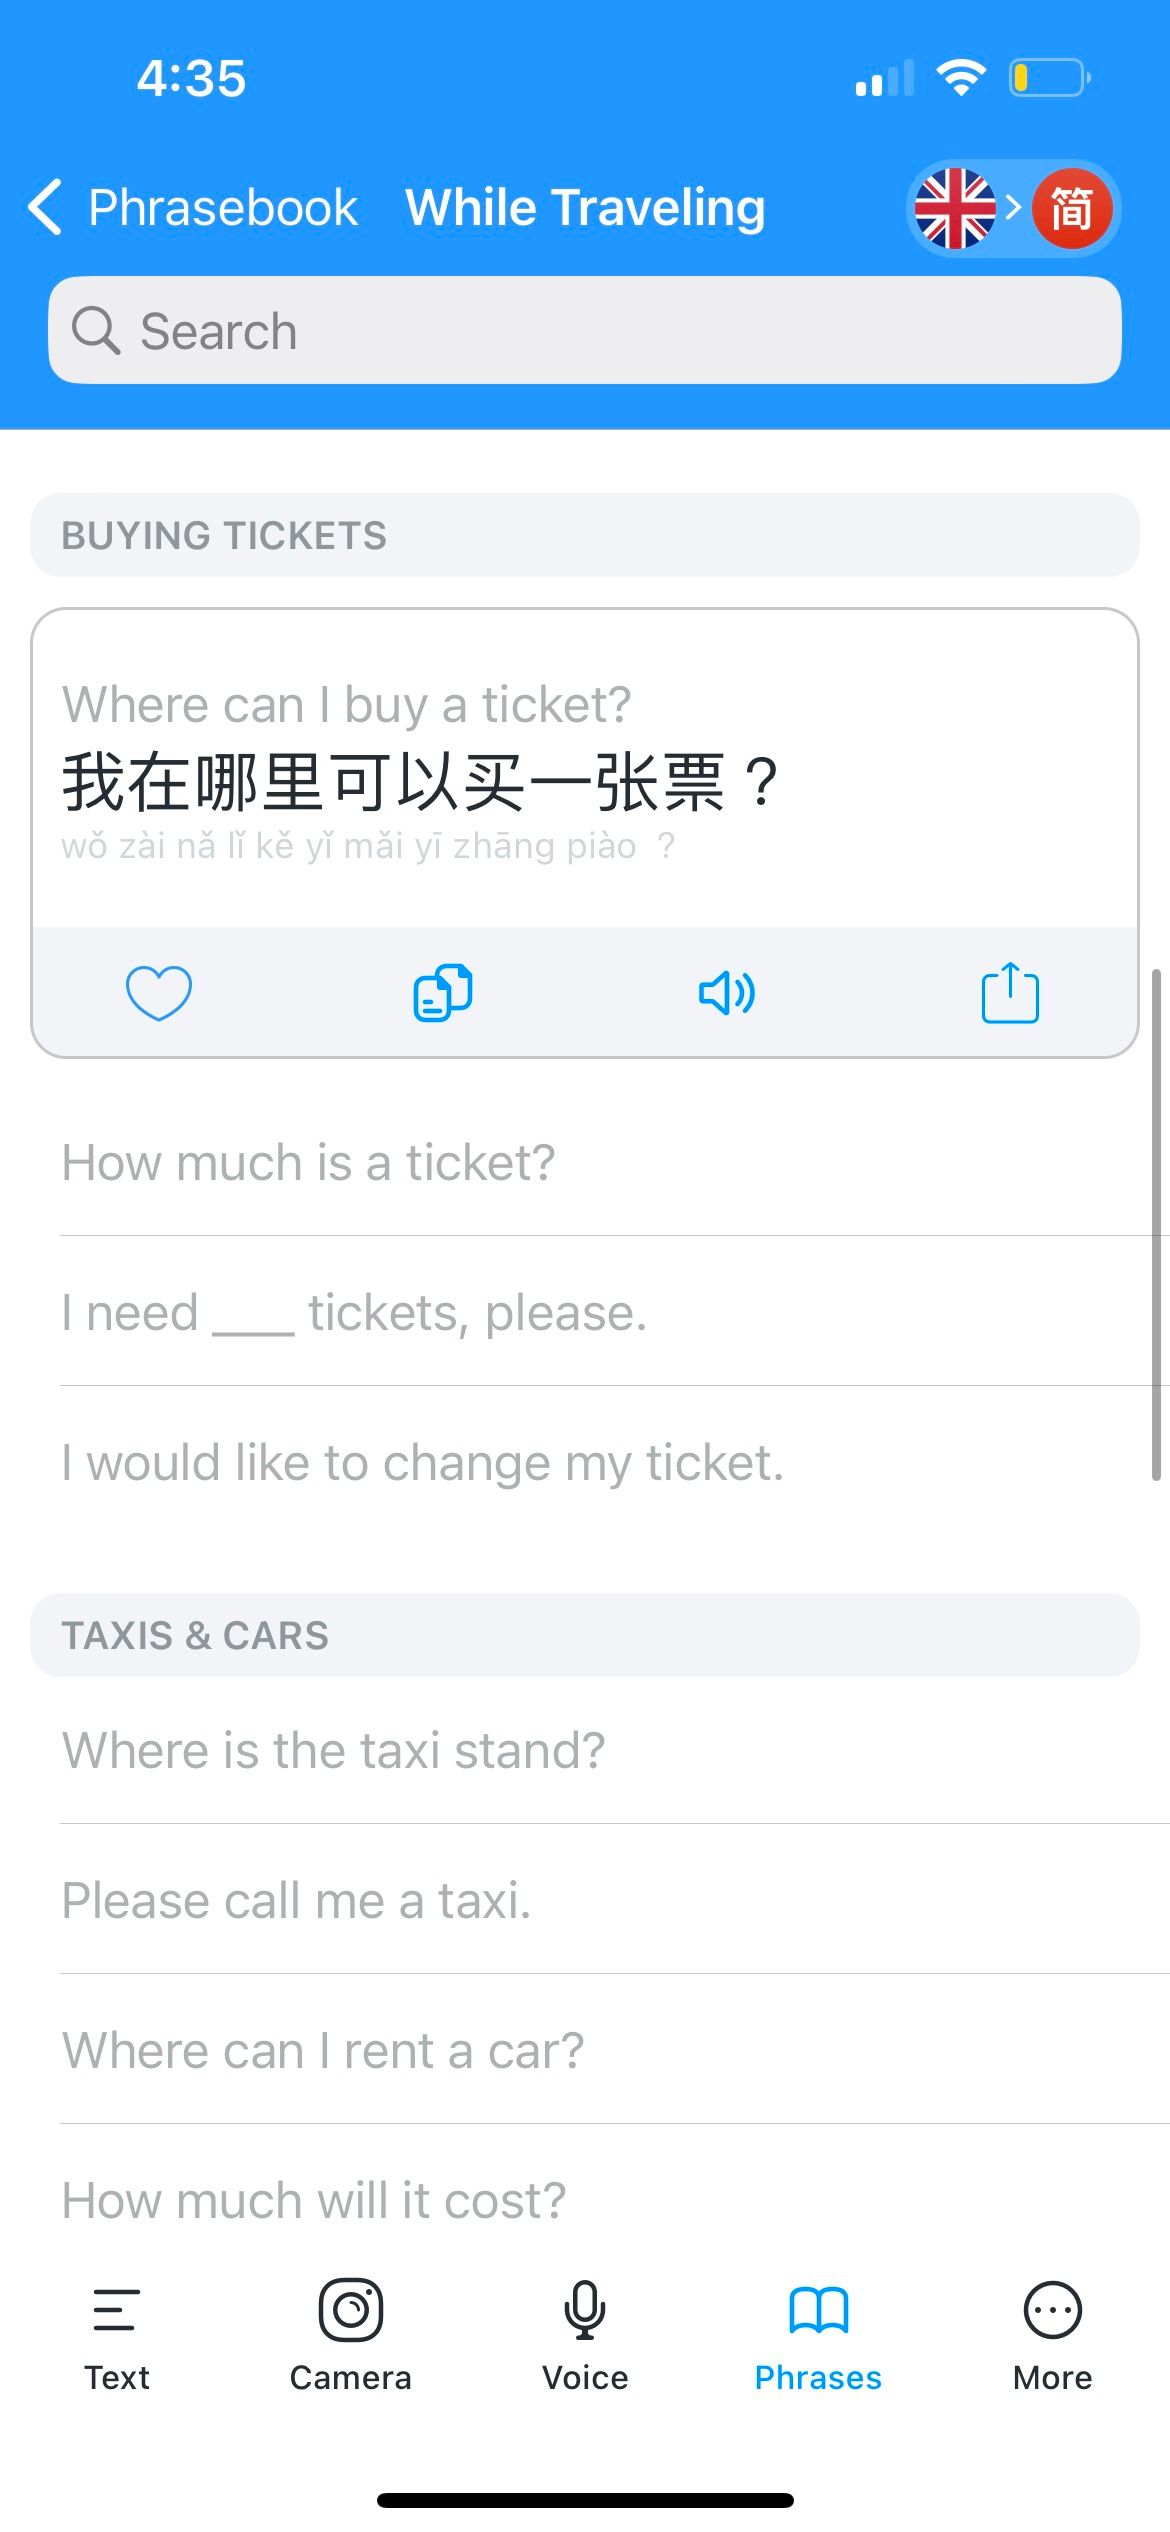 itranslate phrasebook for buying ticket while travelling